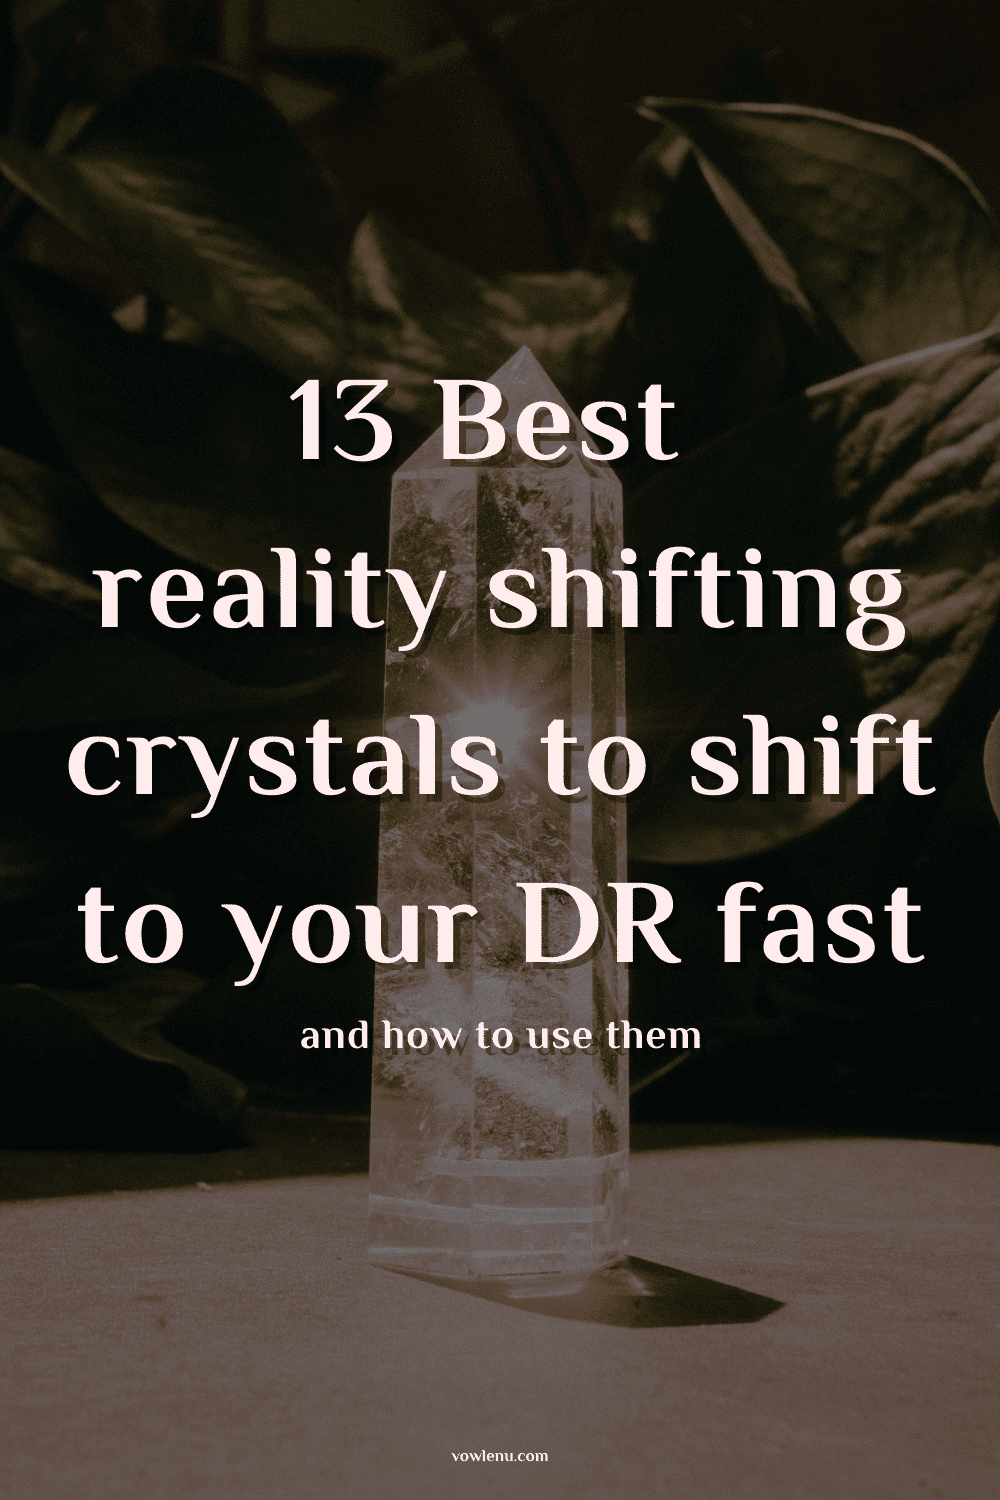 13 Best reality shifting crystals to shift to your DR fast